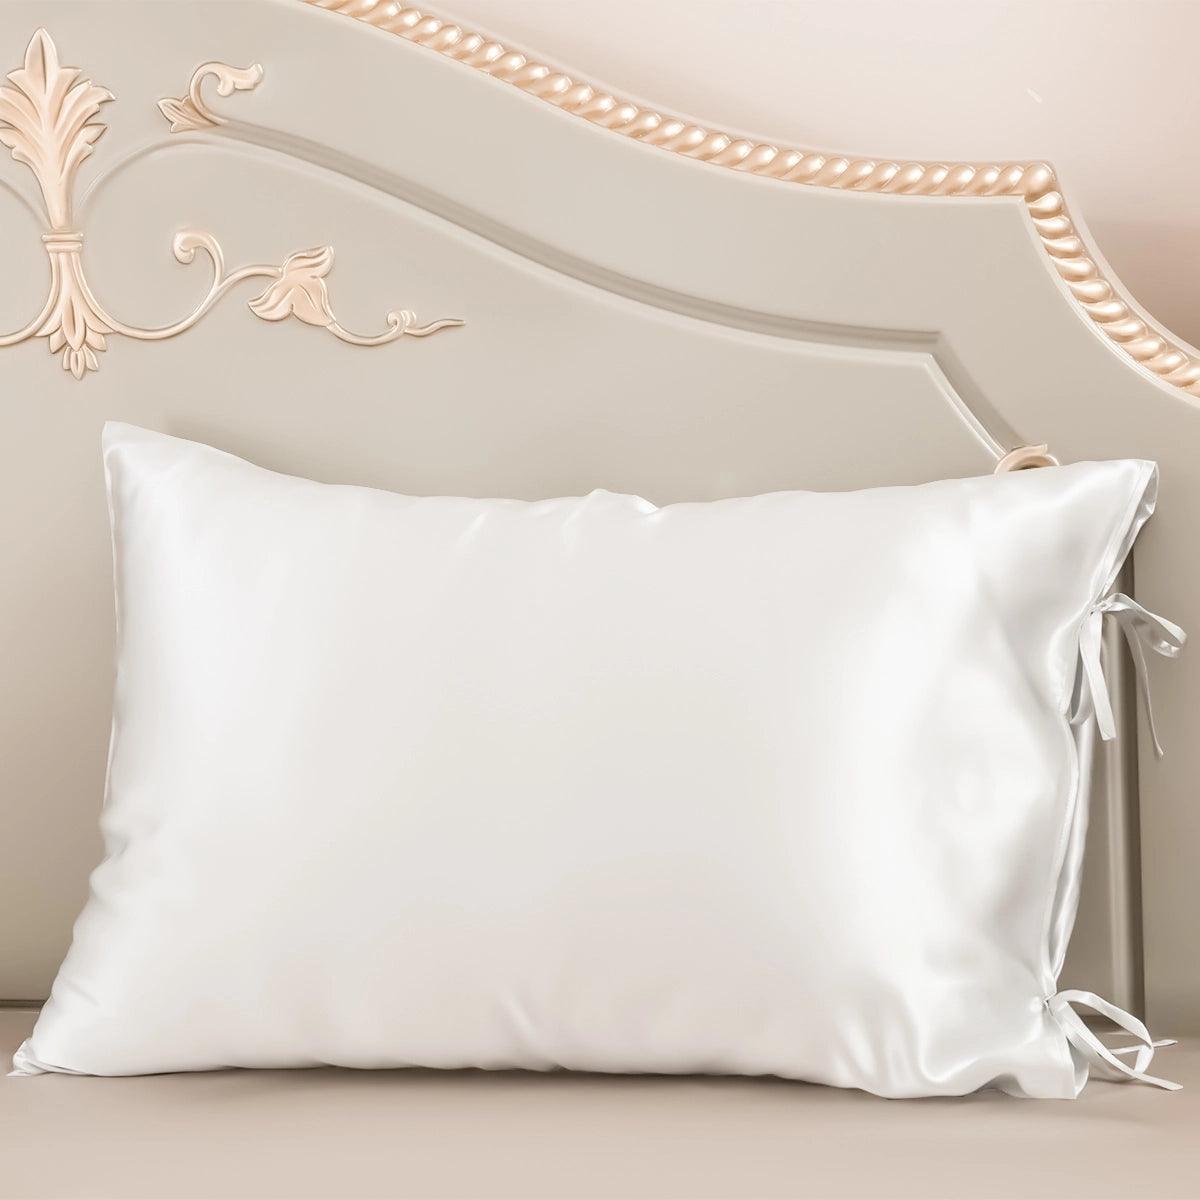 23 mm 6A+ Silk Pillowcase With Envelope With Laundry Bag - promeedsilk